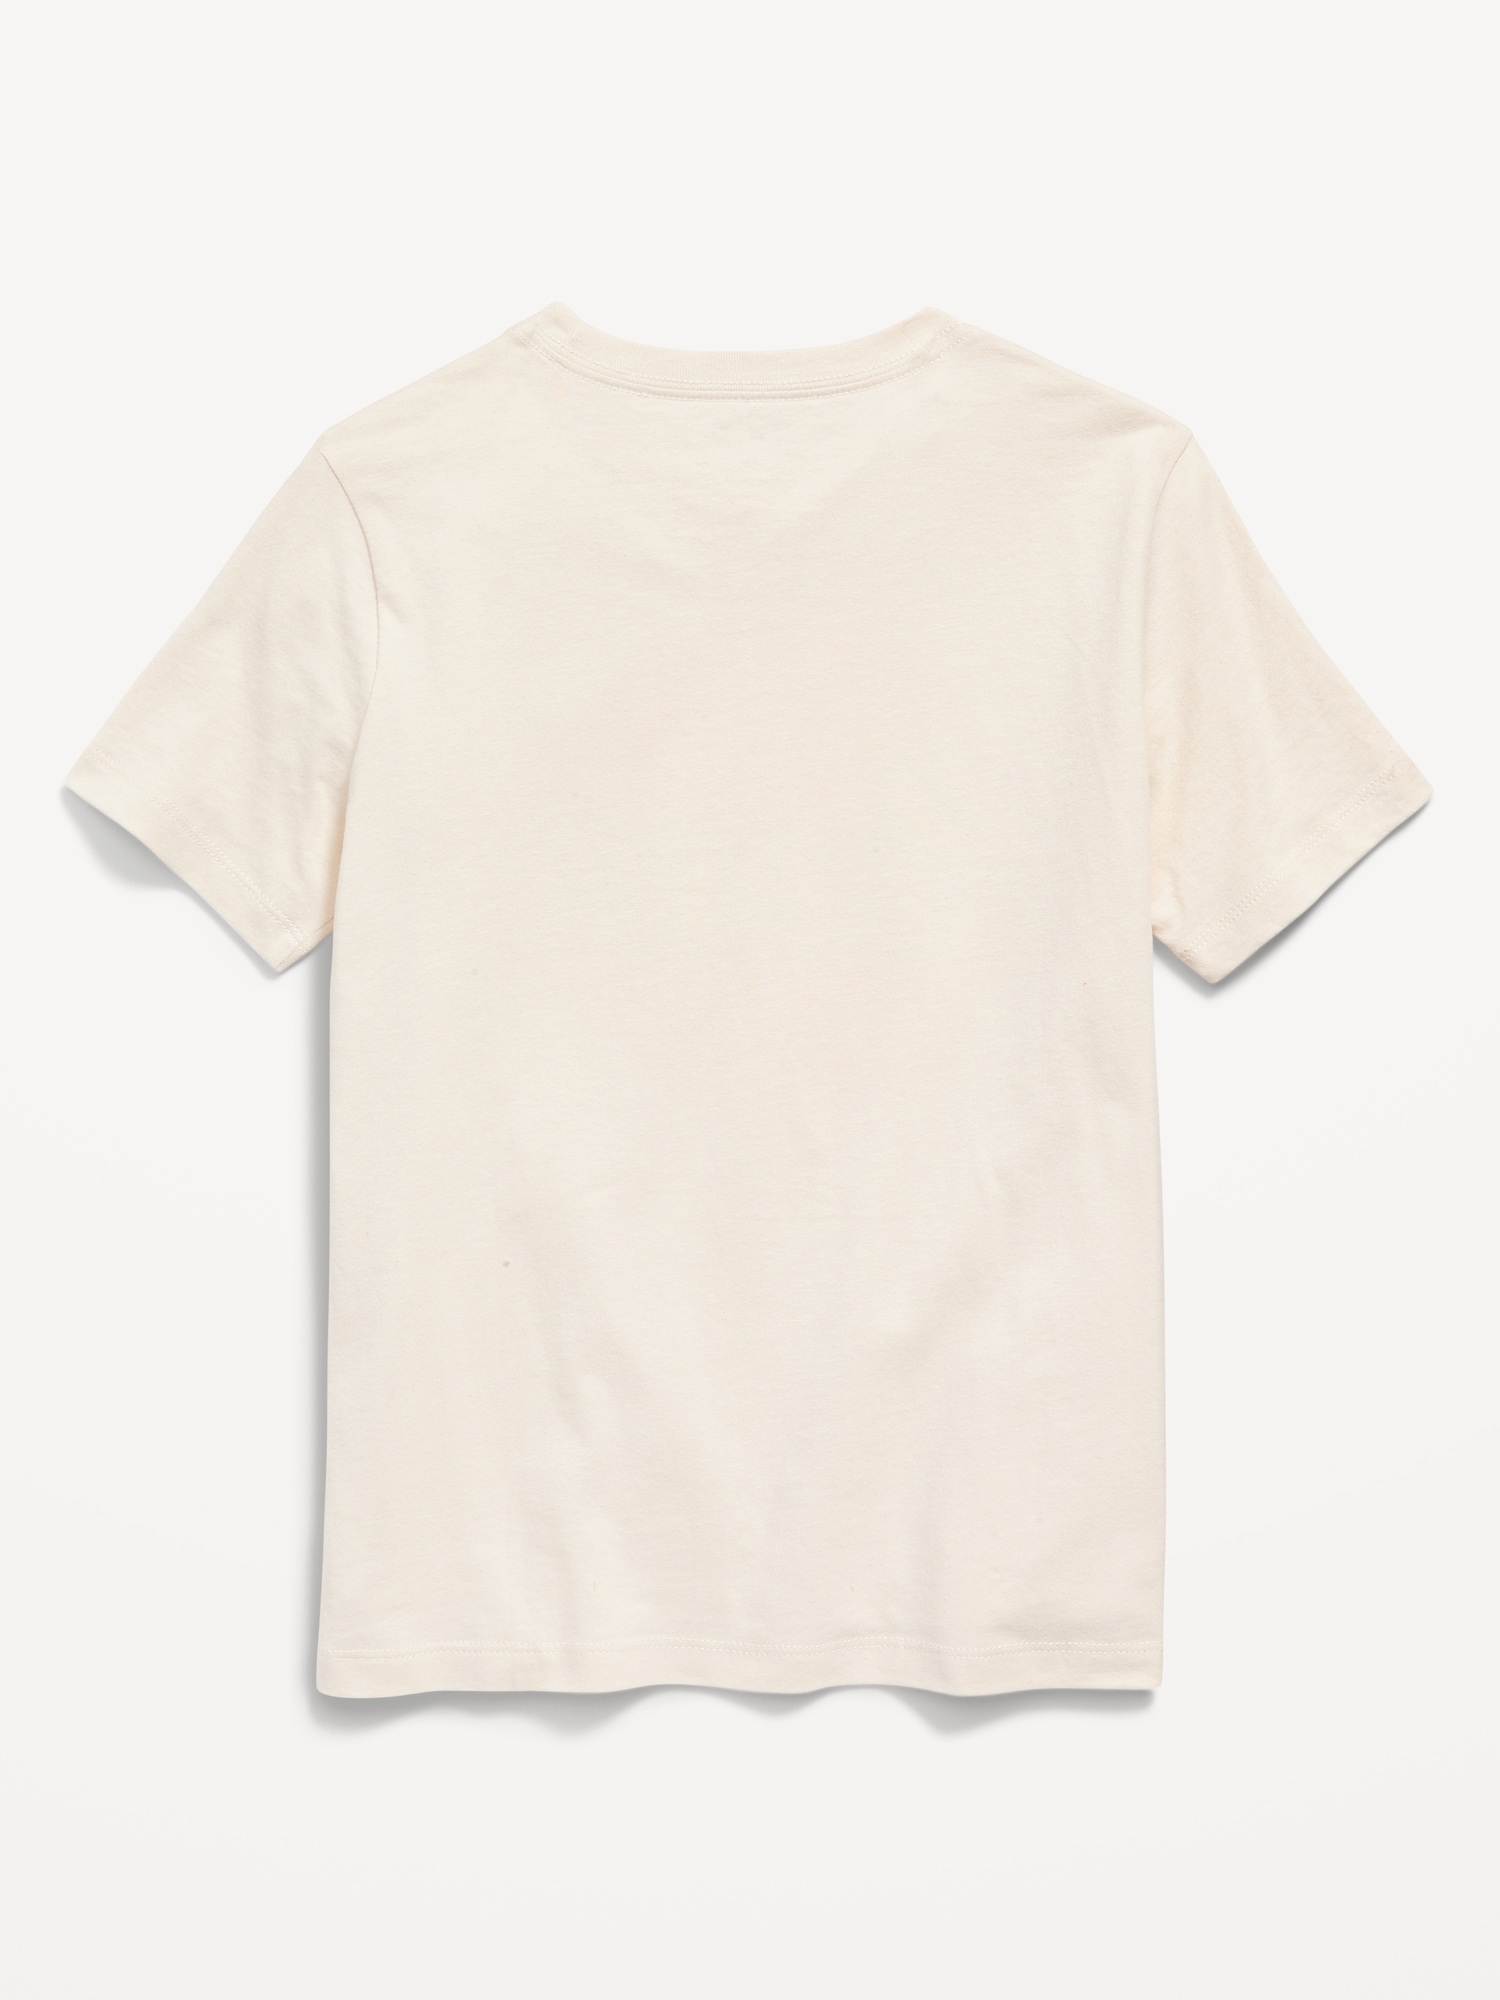 Gender-Neutral Reese's™ Graphic T-Shirt for Kids | Old Navy